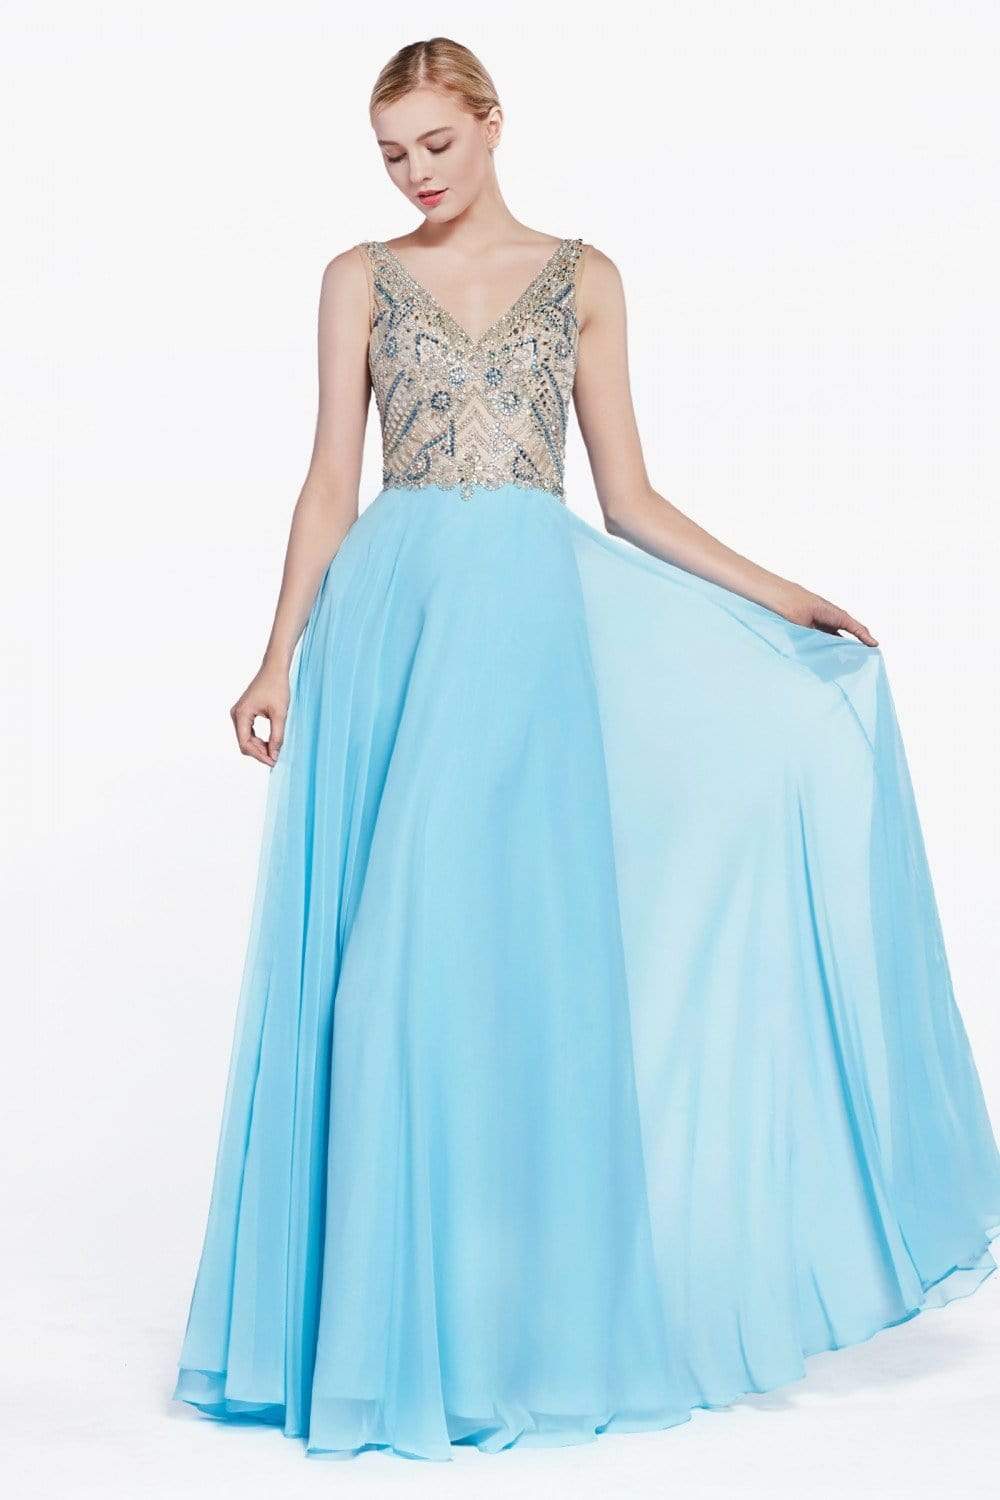 Cinderella Divine - Sheer Long Bell Sleeves Beaded Chiffon Evening Gown
